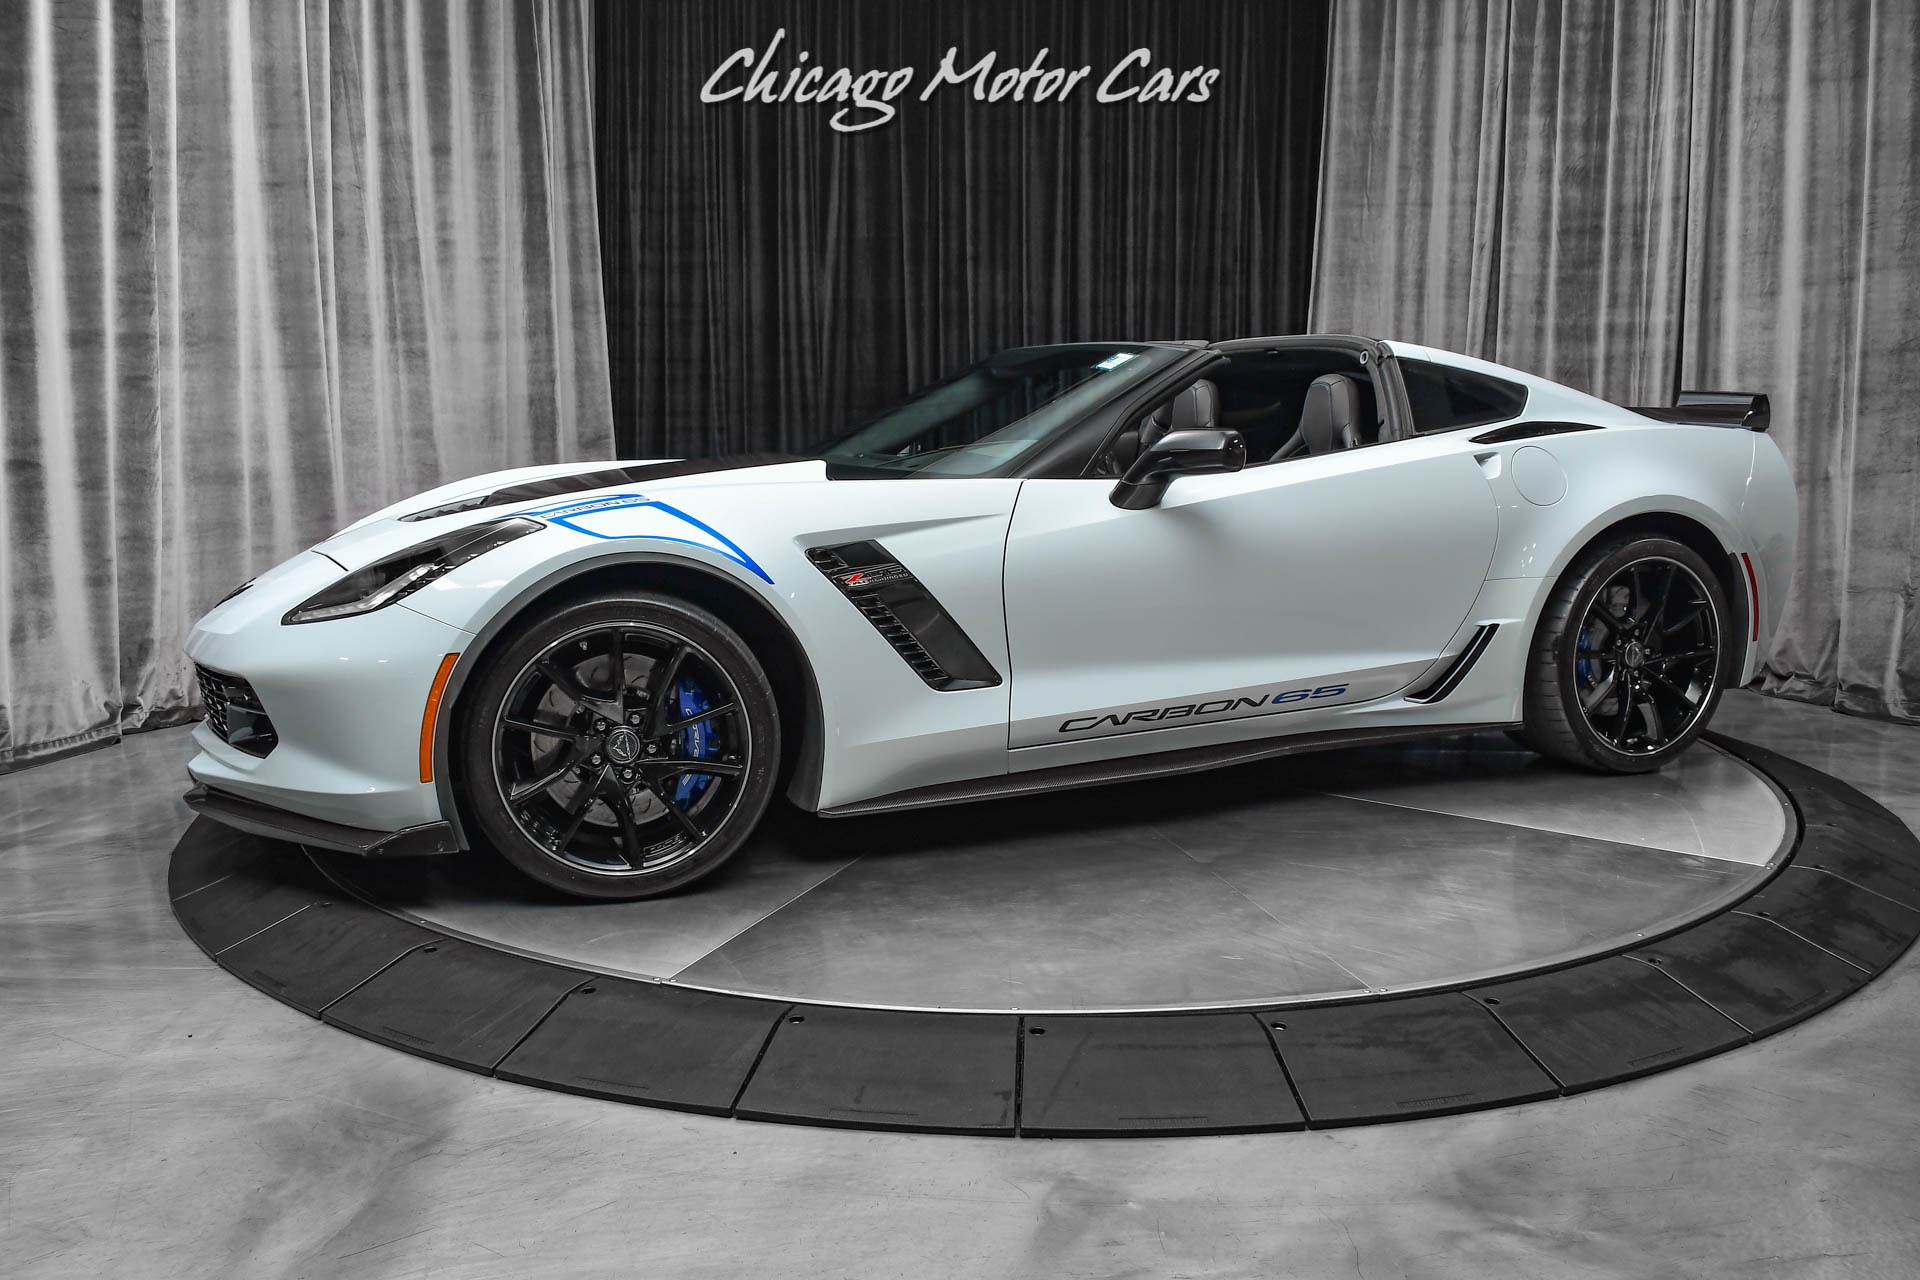 Used-2018-Chevrolet-Corvette-Z06-Carbon-65-edition-Coupe-Only-2400-Miles-COLLECTOR-QUALITY